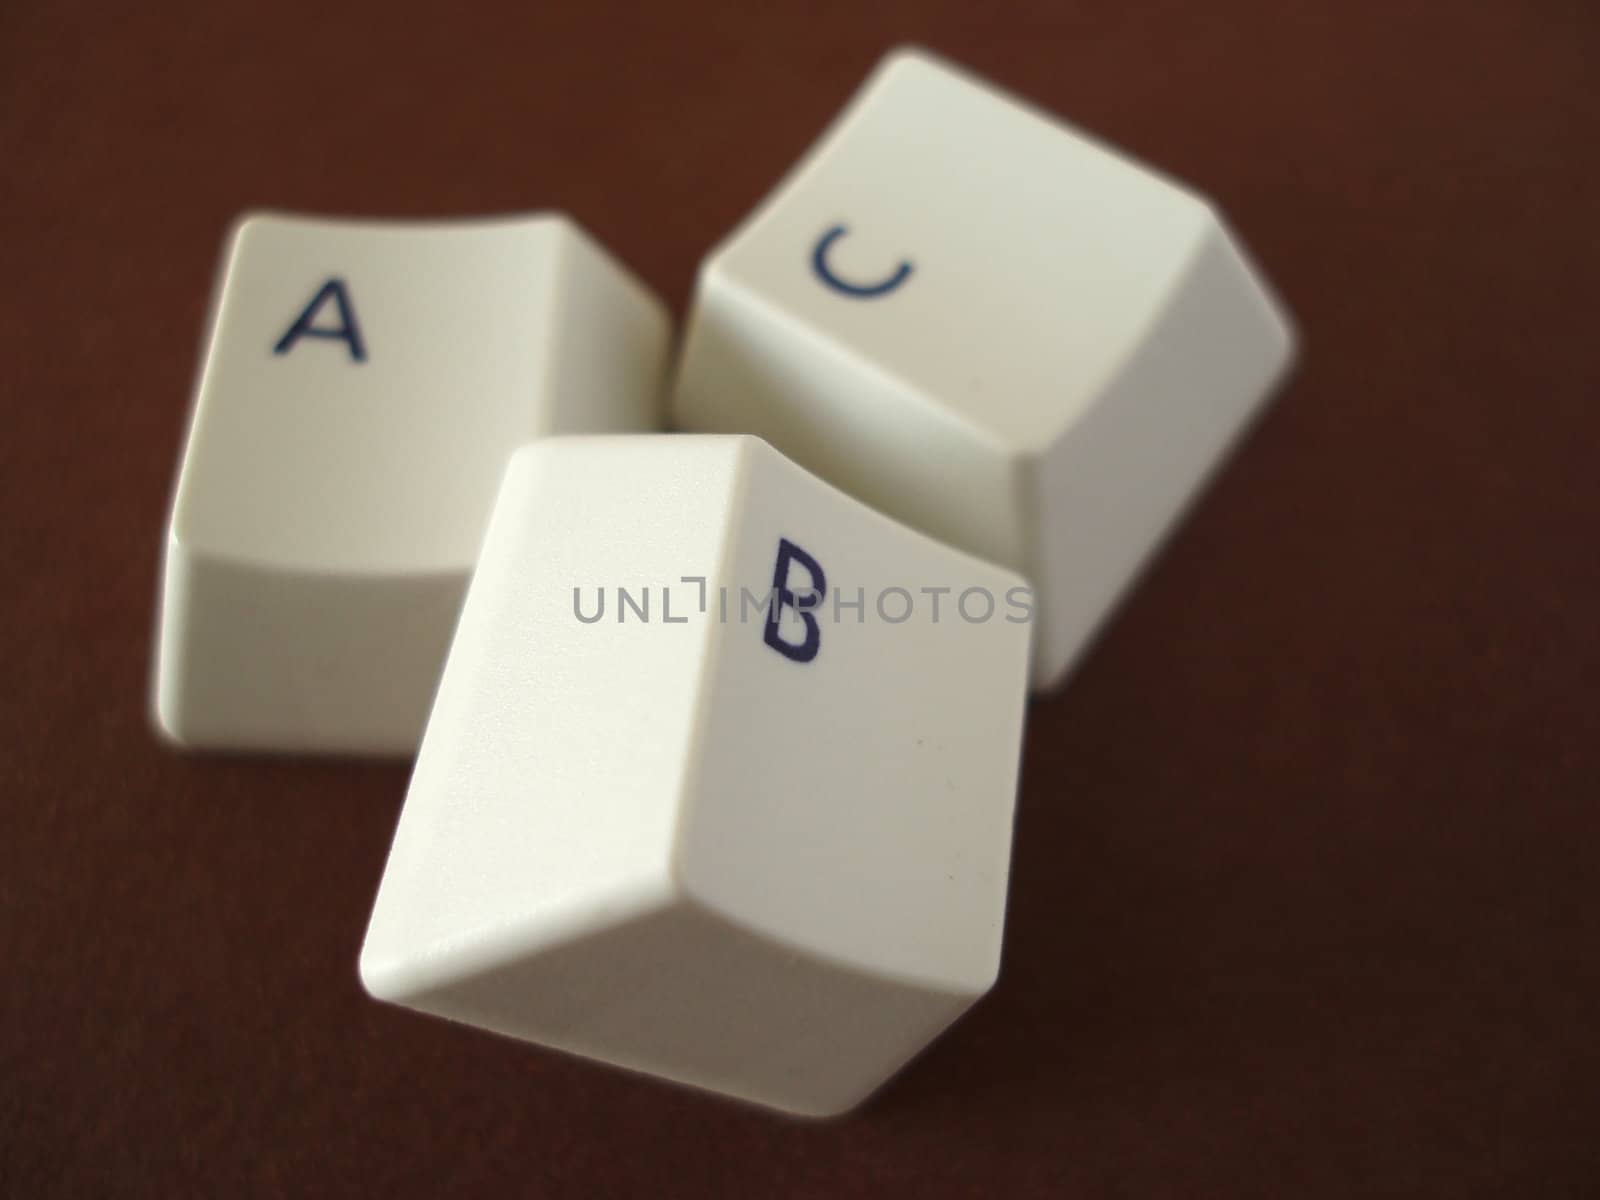 The ABC keys from a computer keyboard